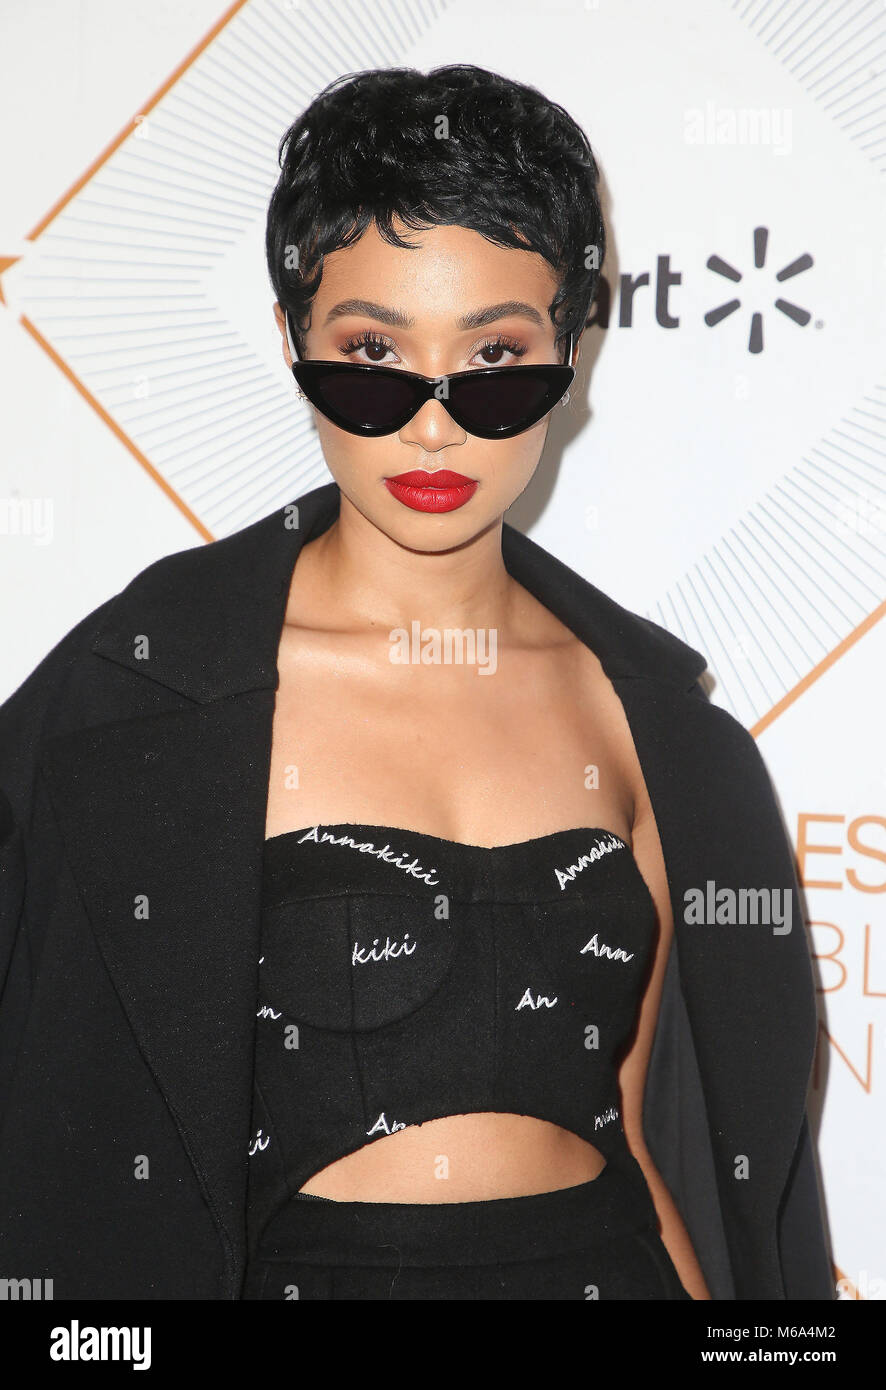 Beverly Hills, California, USA. 1st Mar, 2018. SYMPHANI SOTO attends 2018 Essence Black Women In Hollywood Oscars Luncheon held at the Regent Beverly Wilshire Hotel. Credit: F. Sadou/AdMedia/ZUMA Wire/Alamy Live News Stock Photo